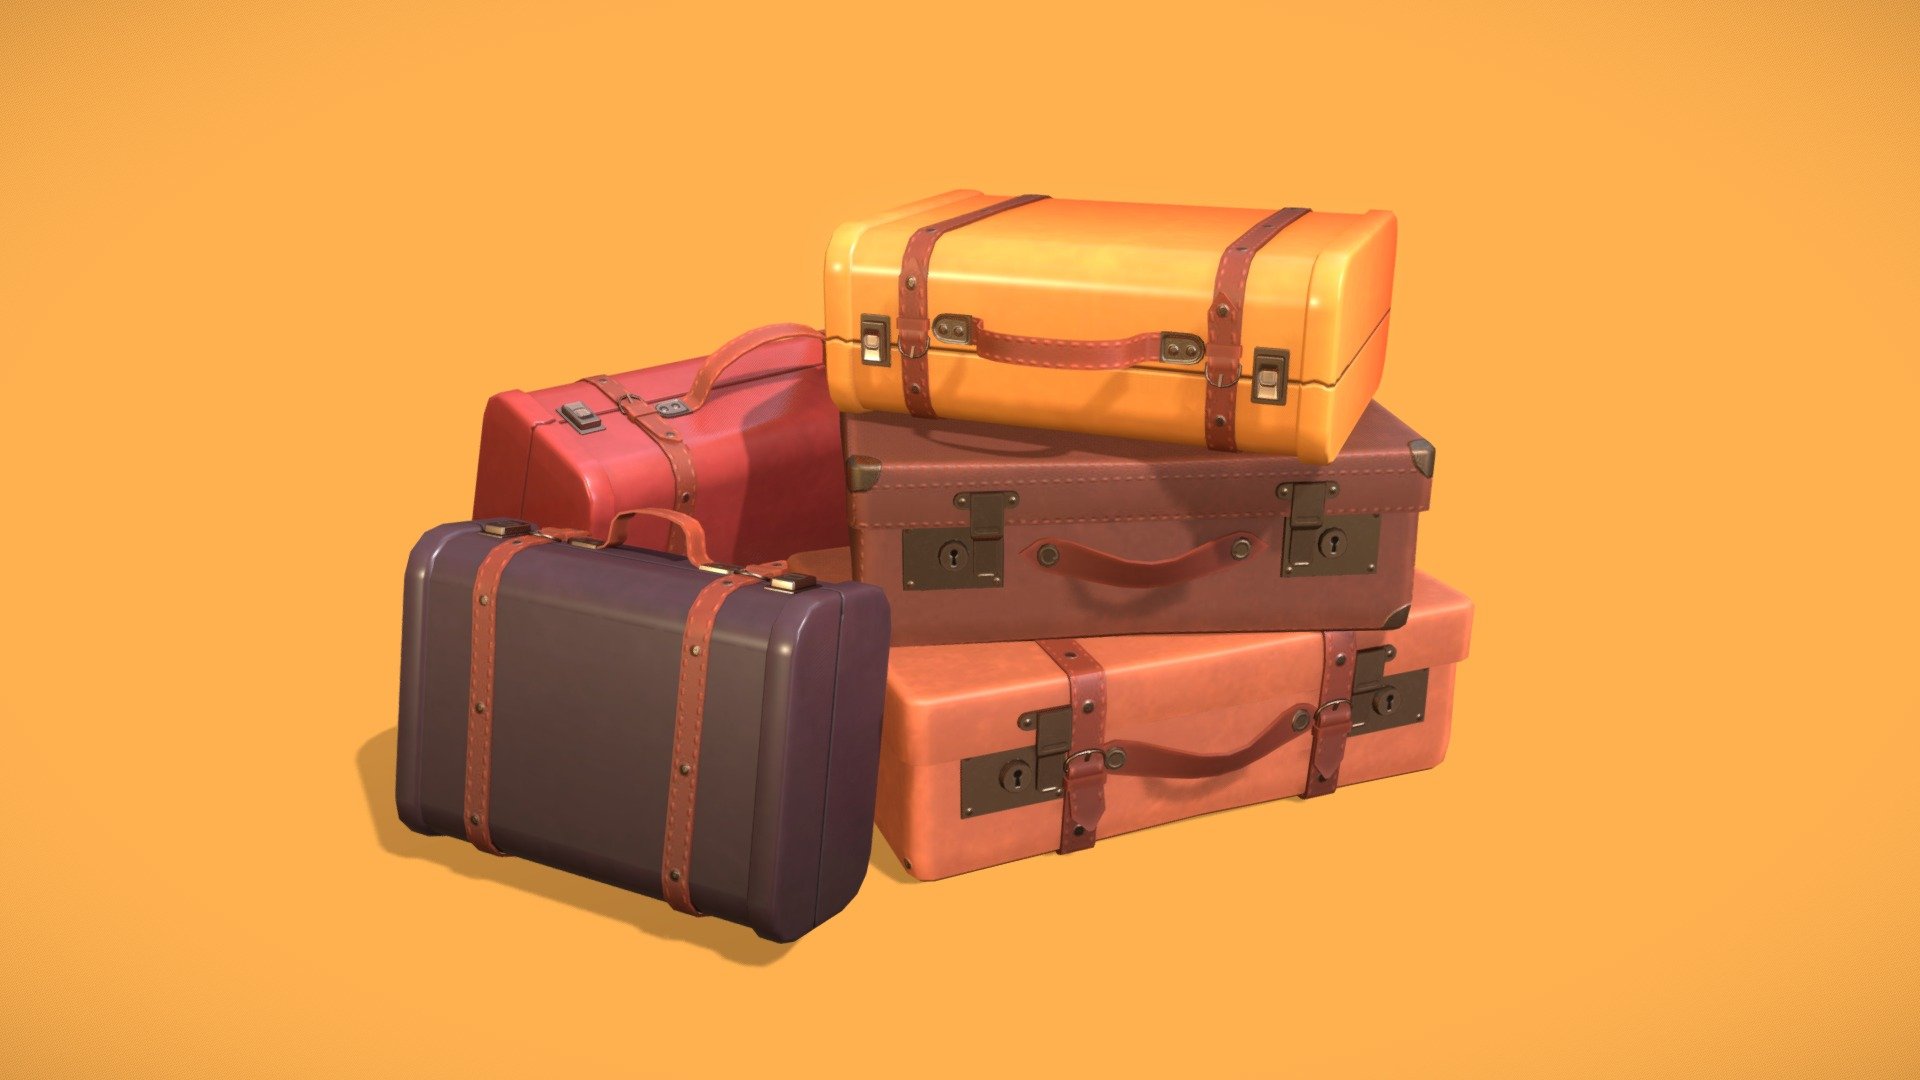 This cartoony set of suitcases is lowpoly and game ready. The suitcases have real world measurements so you can retexture them into realistisch assets if you want. They all share the same UV space and textures. UVs have been optimized with several overlapping UV islands. The individual assets are in the scene as a second annotation for easy use without rotation 3d model